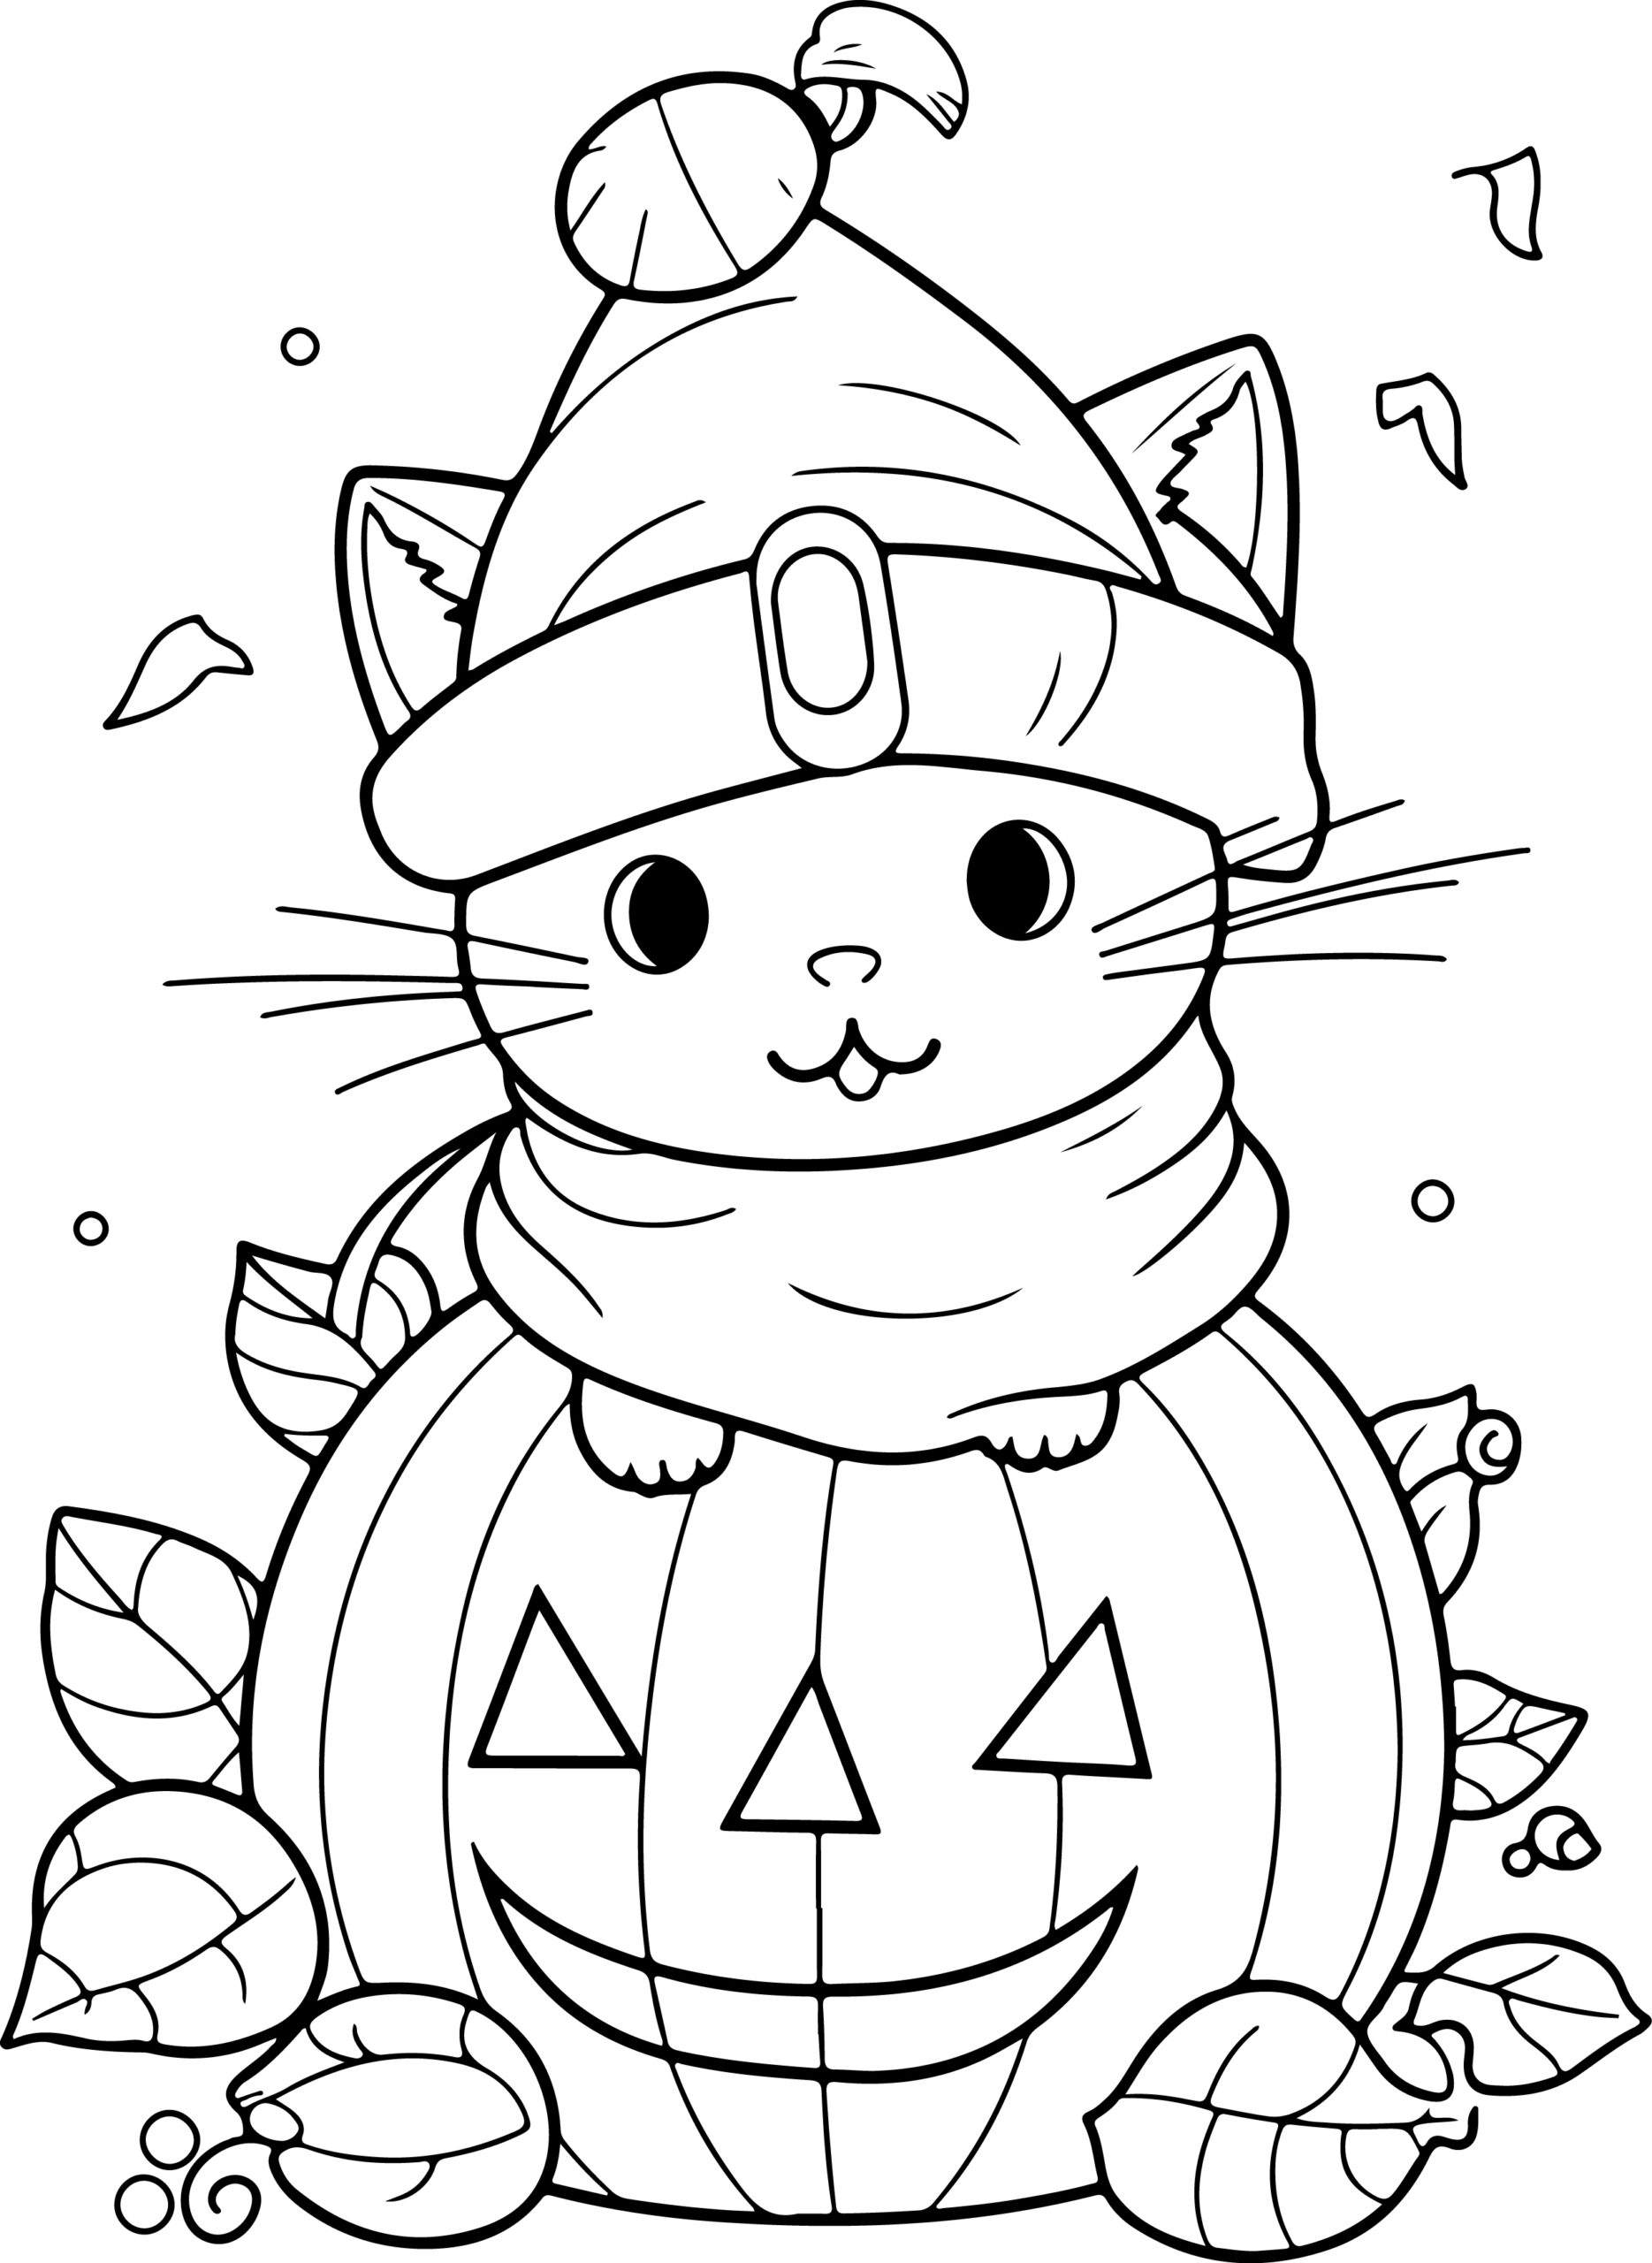 Halloween coloring book beautiful cat coloring pages cute cats ghosts pumpkins made by teachers